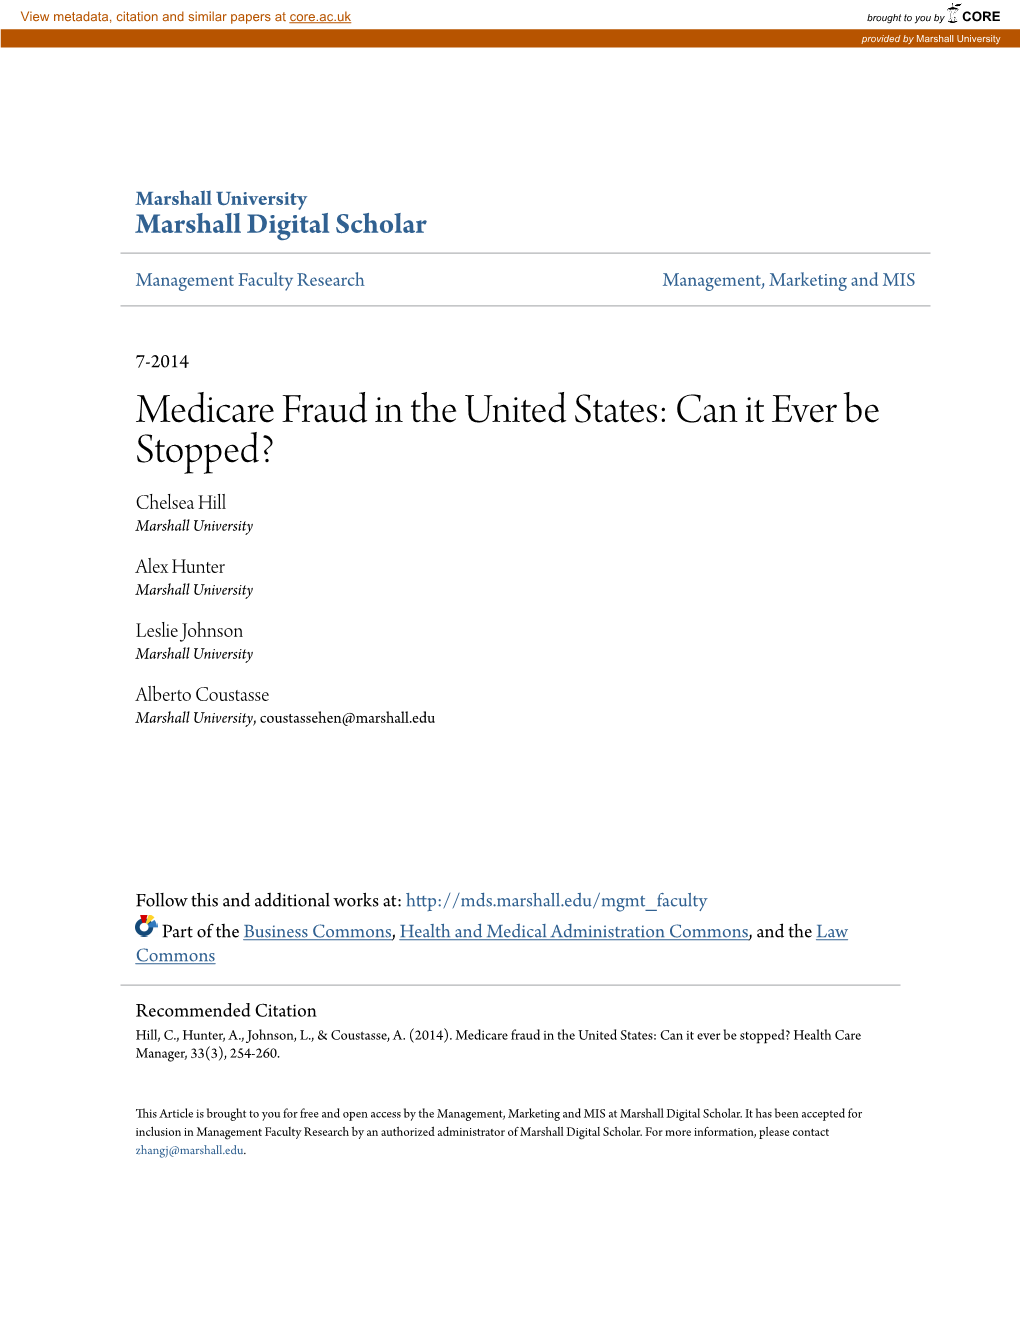 Medicare Fraud in the United States: Can It Ever Be Stopped? Chelsea Hill Marshall University